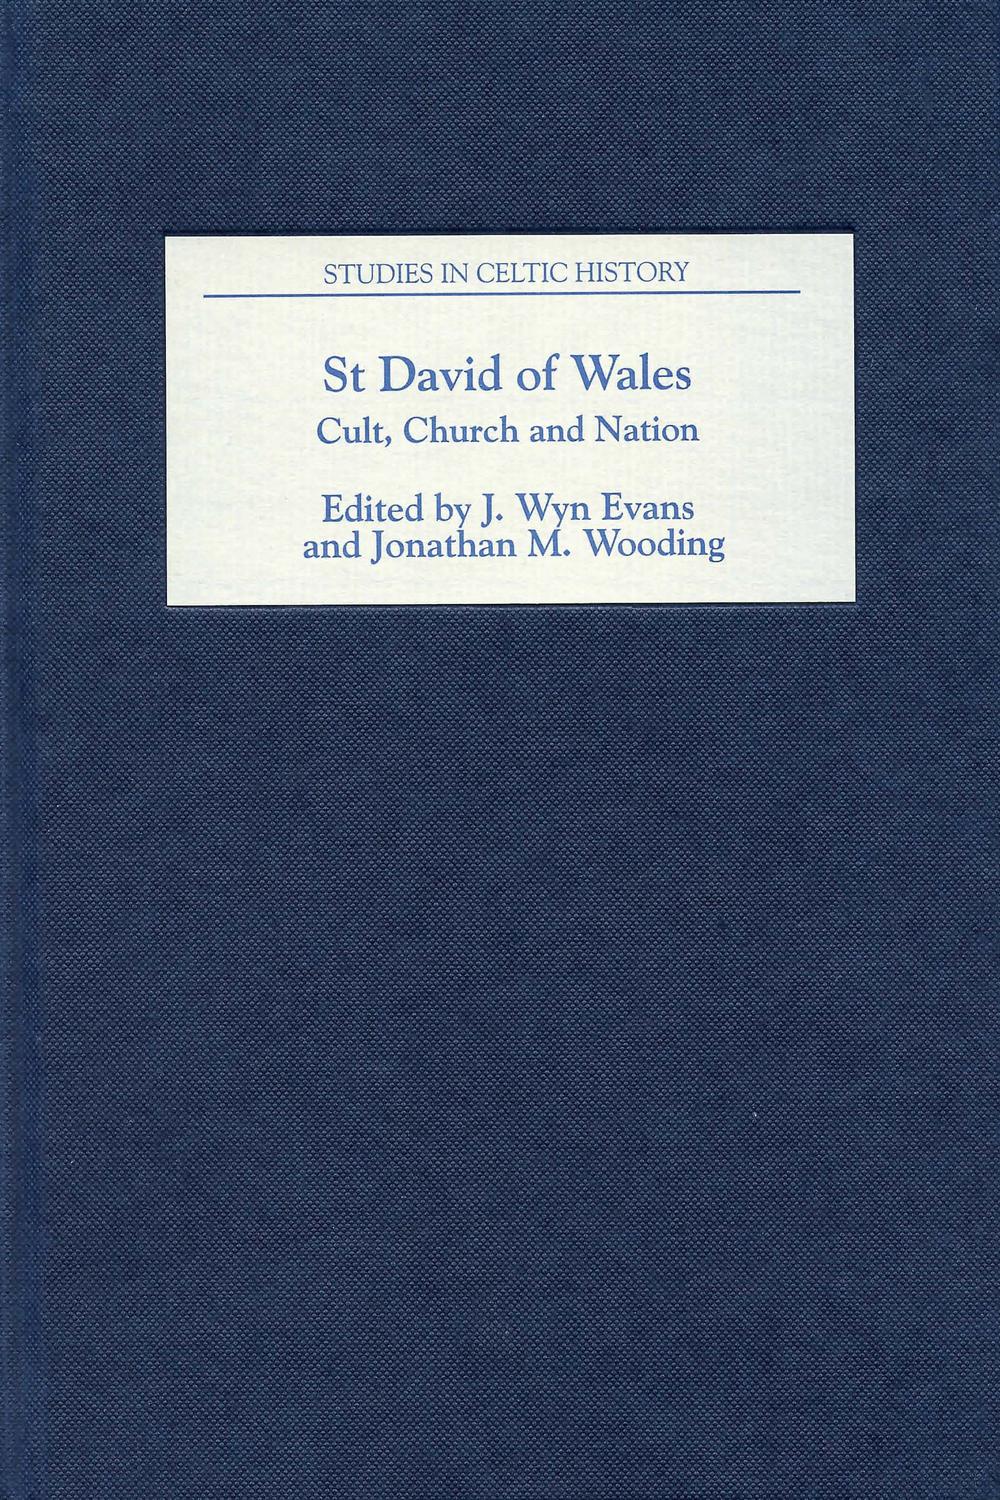 St David of Wales: Cult, Church and Nation - J. Wyn Evans, Jonathan M. Wooding